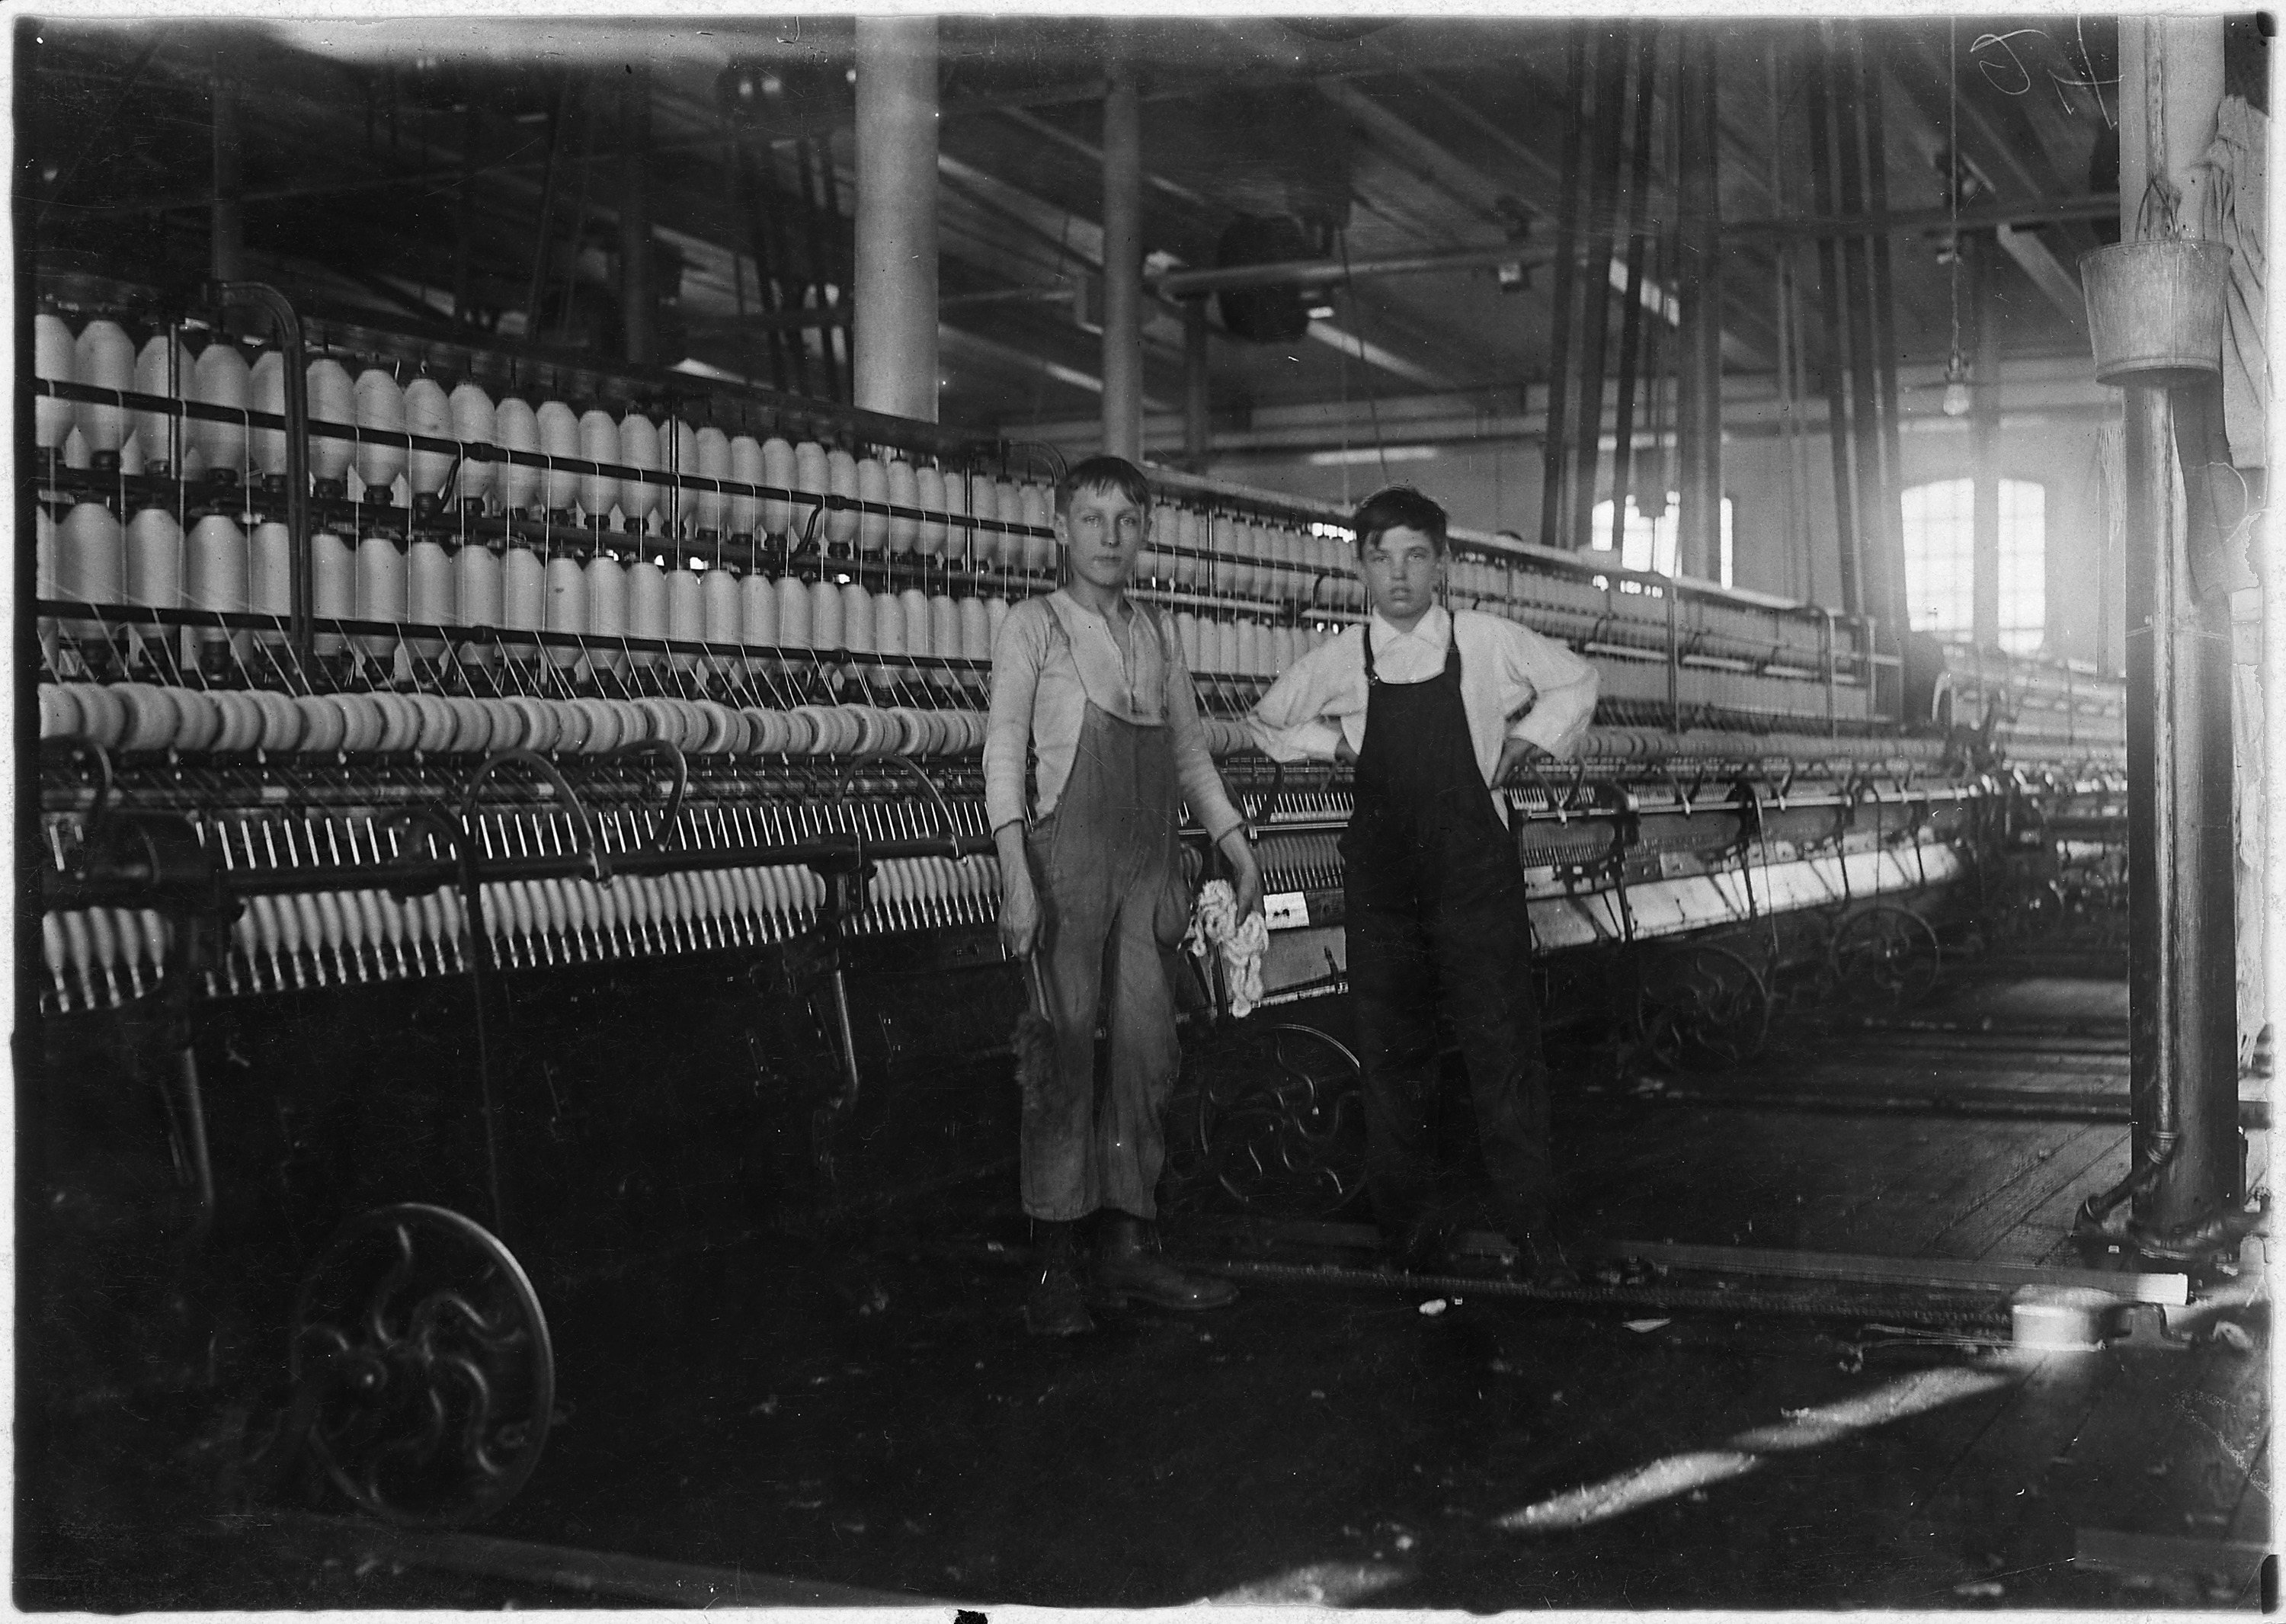 Interior of Wamsutta Mill, New Bedford, Mass. Wilfred, youngest boy, appears thirteen years. He has been working a... - NARA - 523508